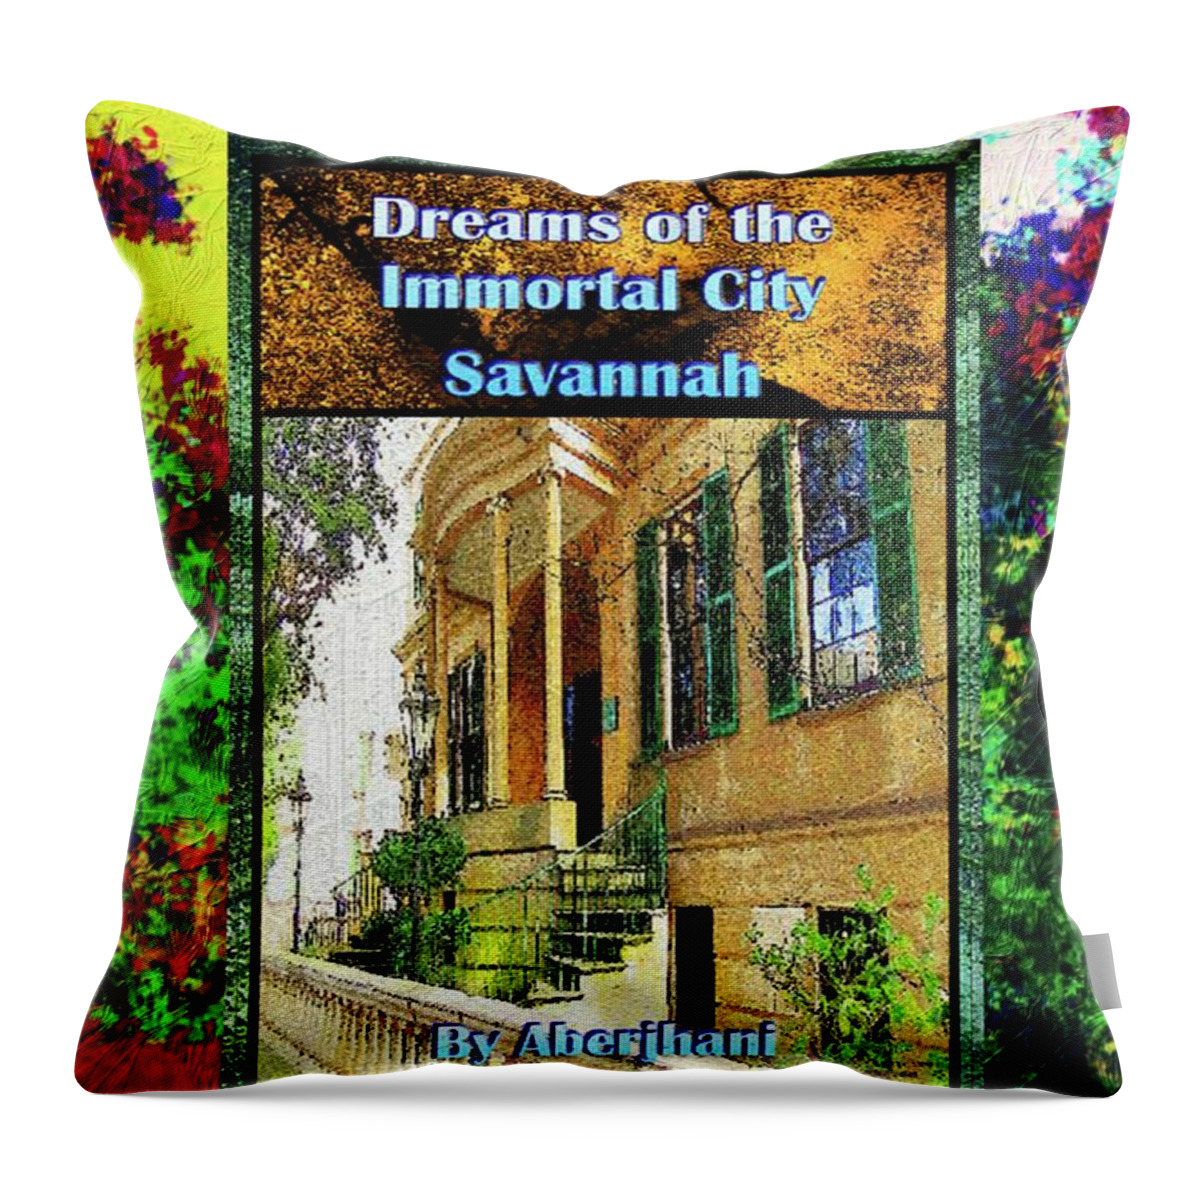 Book Cover Art Throw Pillow featuring the mixed media Collectible Dreaming Savannah Book Poster by Aberjhani